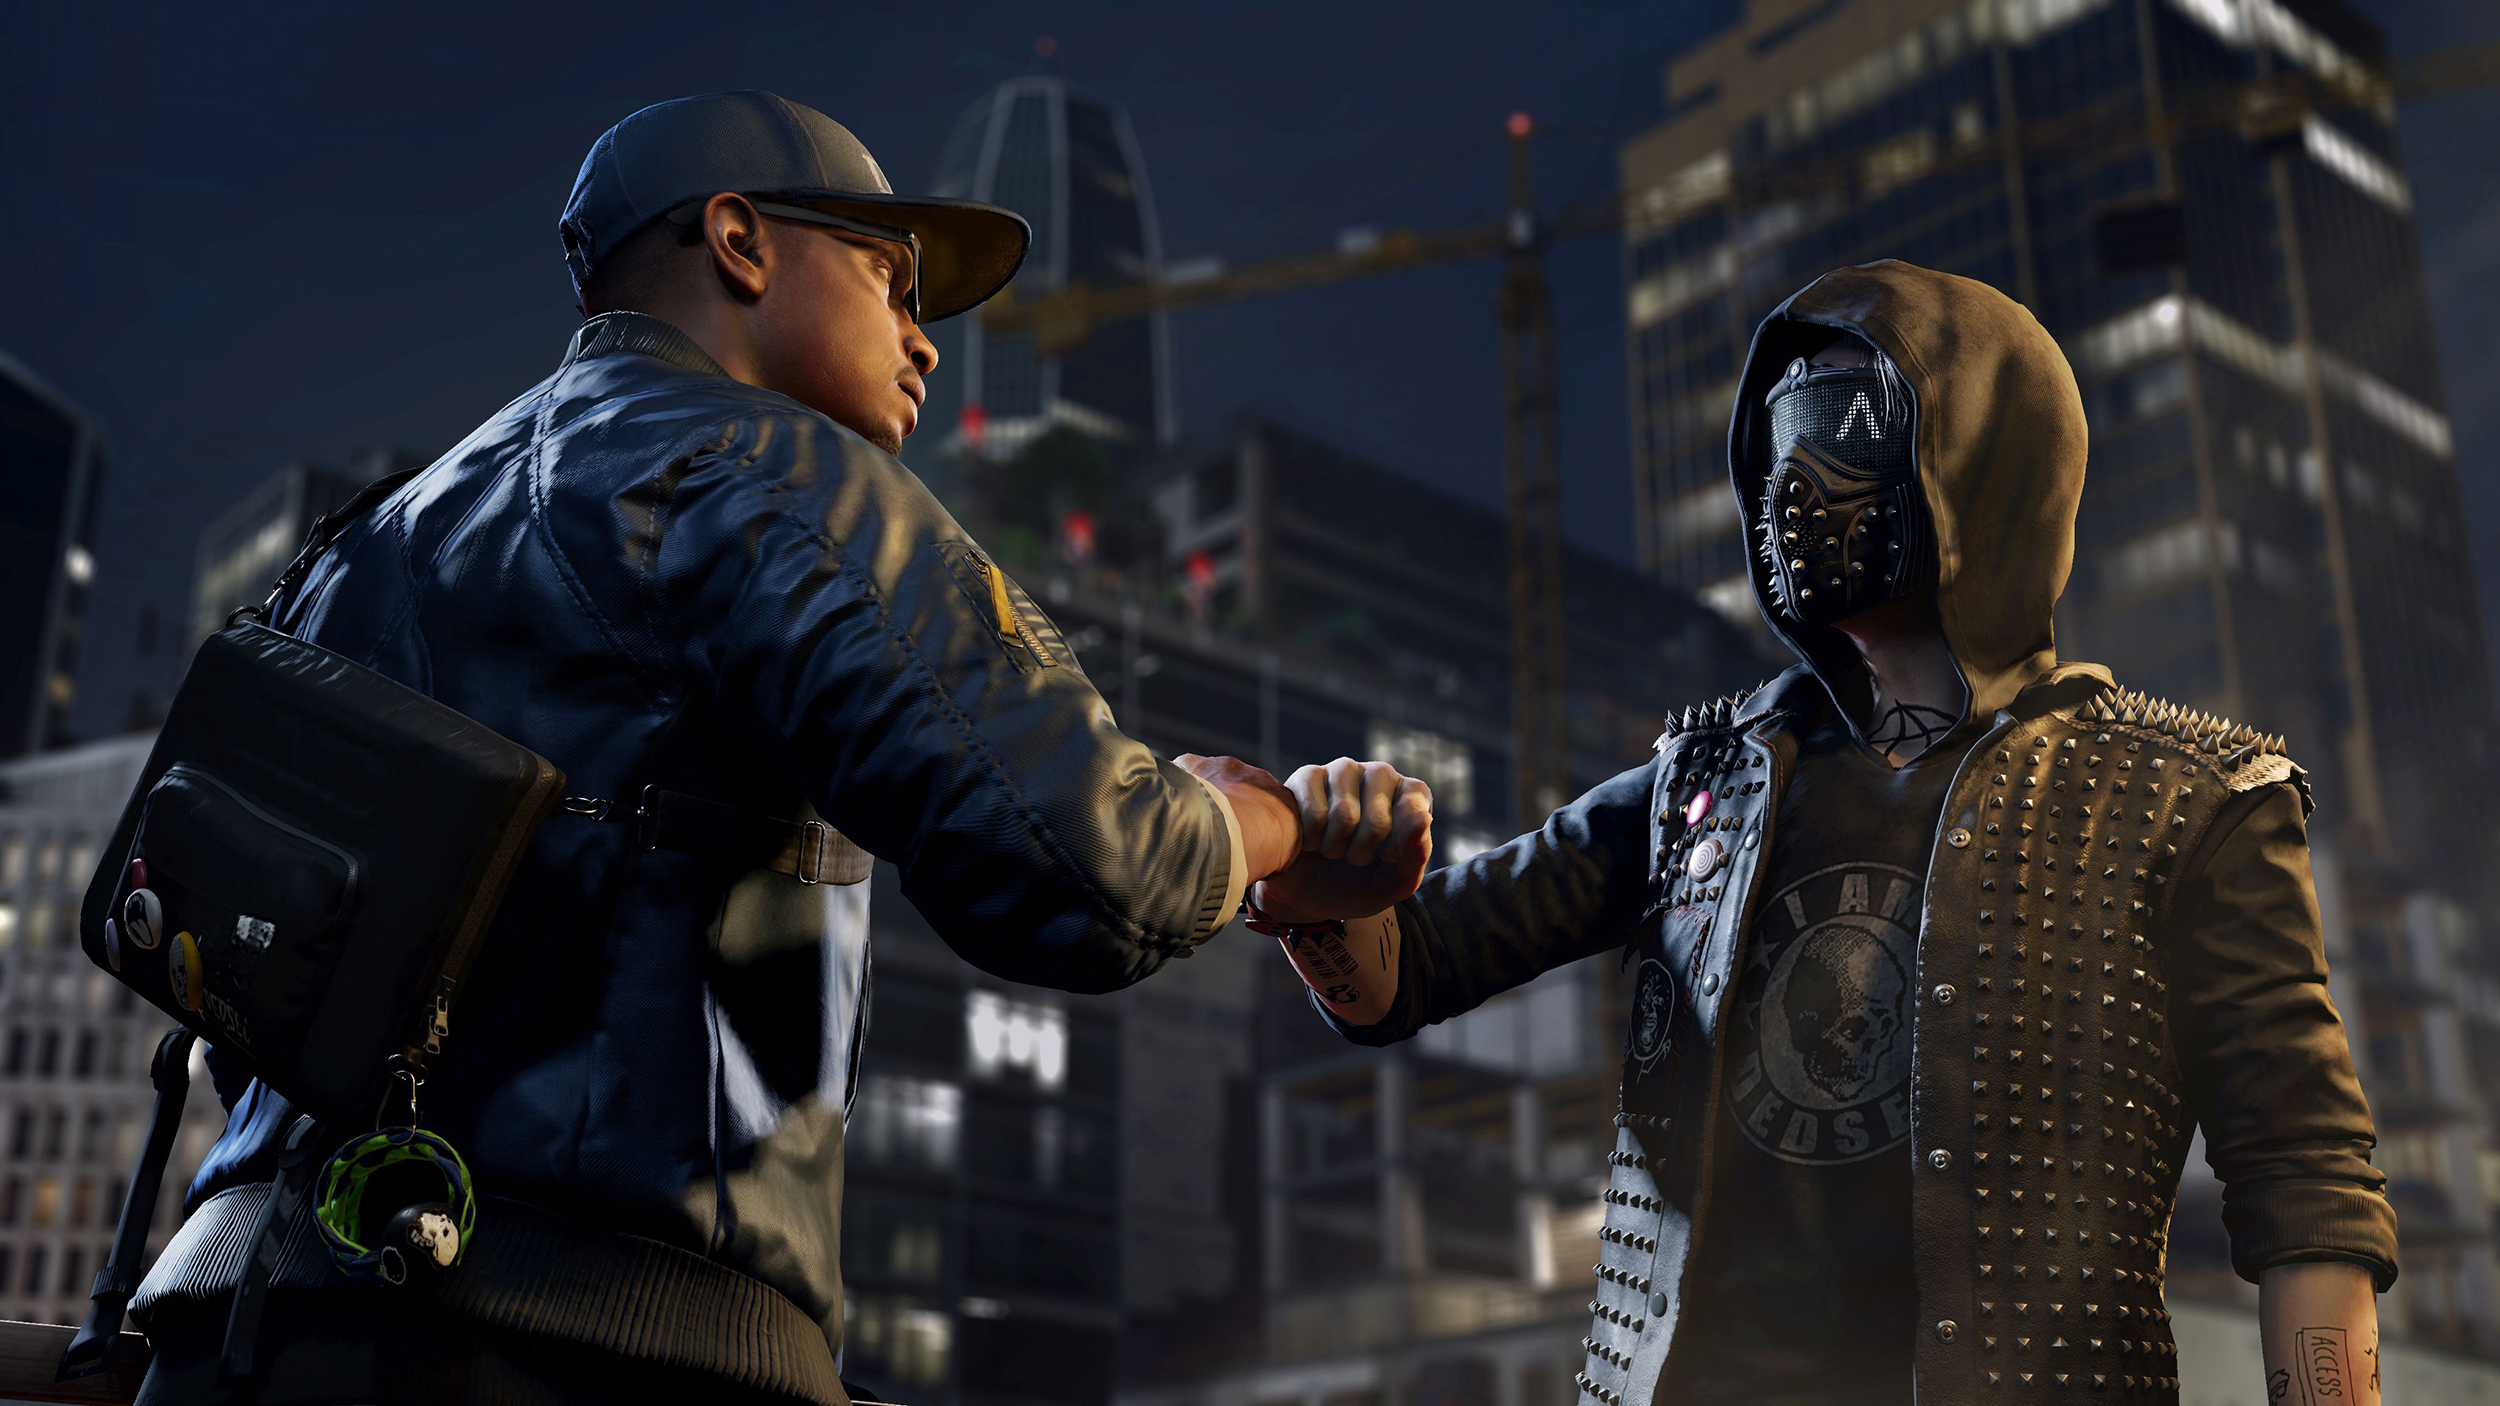 watch dogs, watch dogs 2, video game